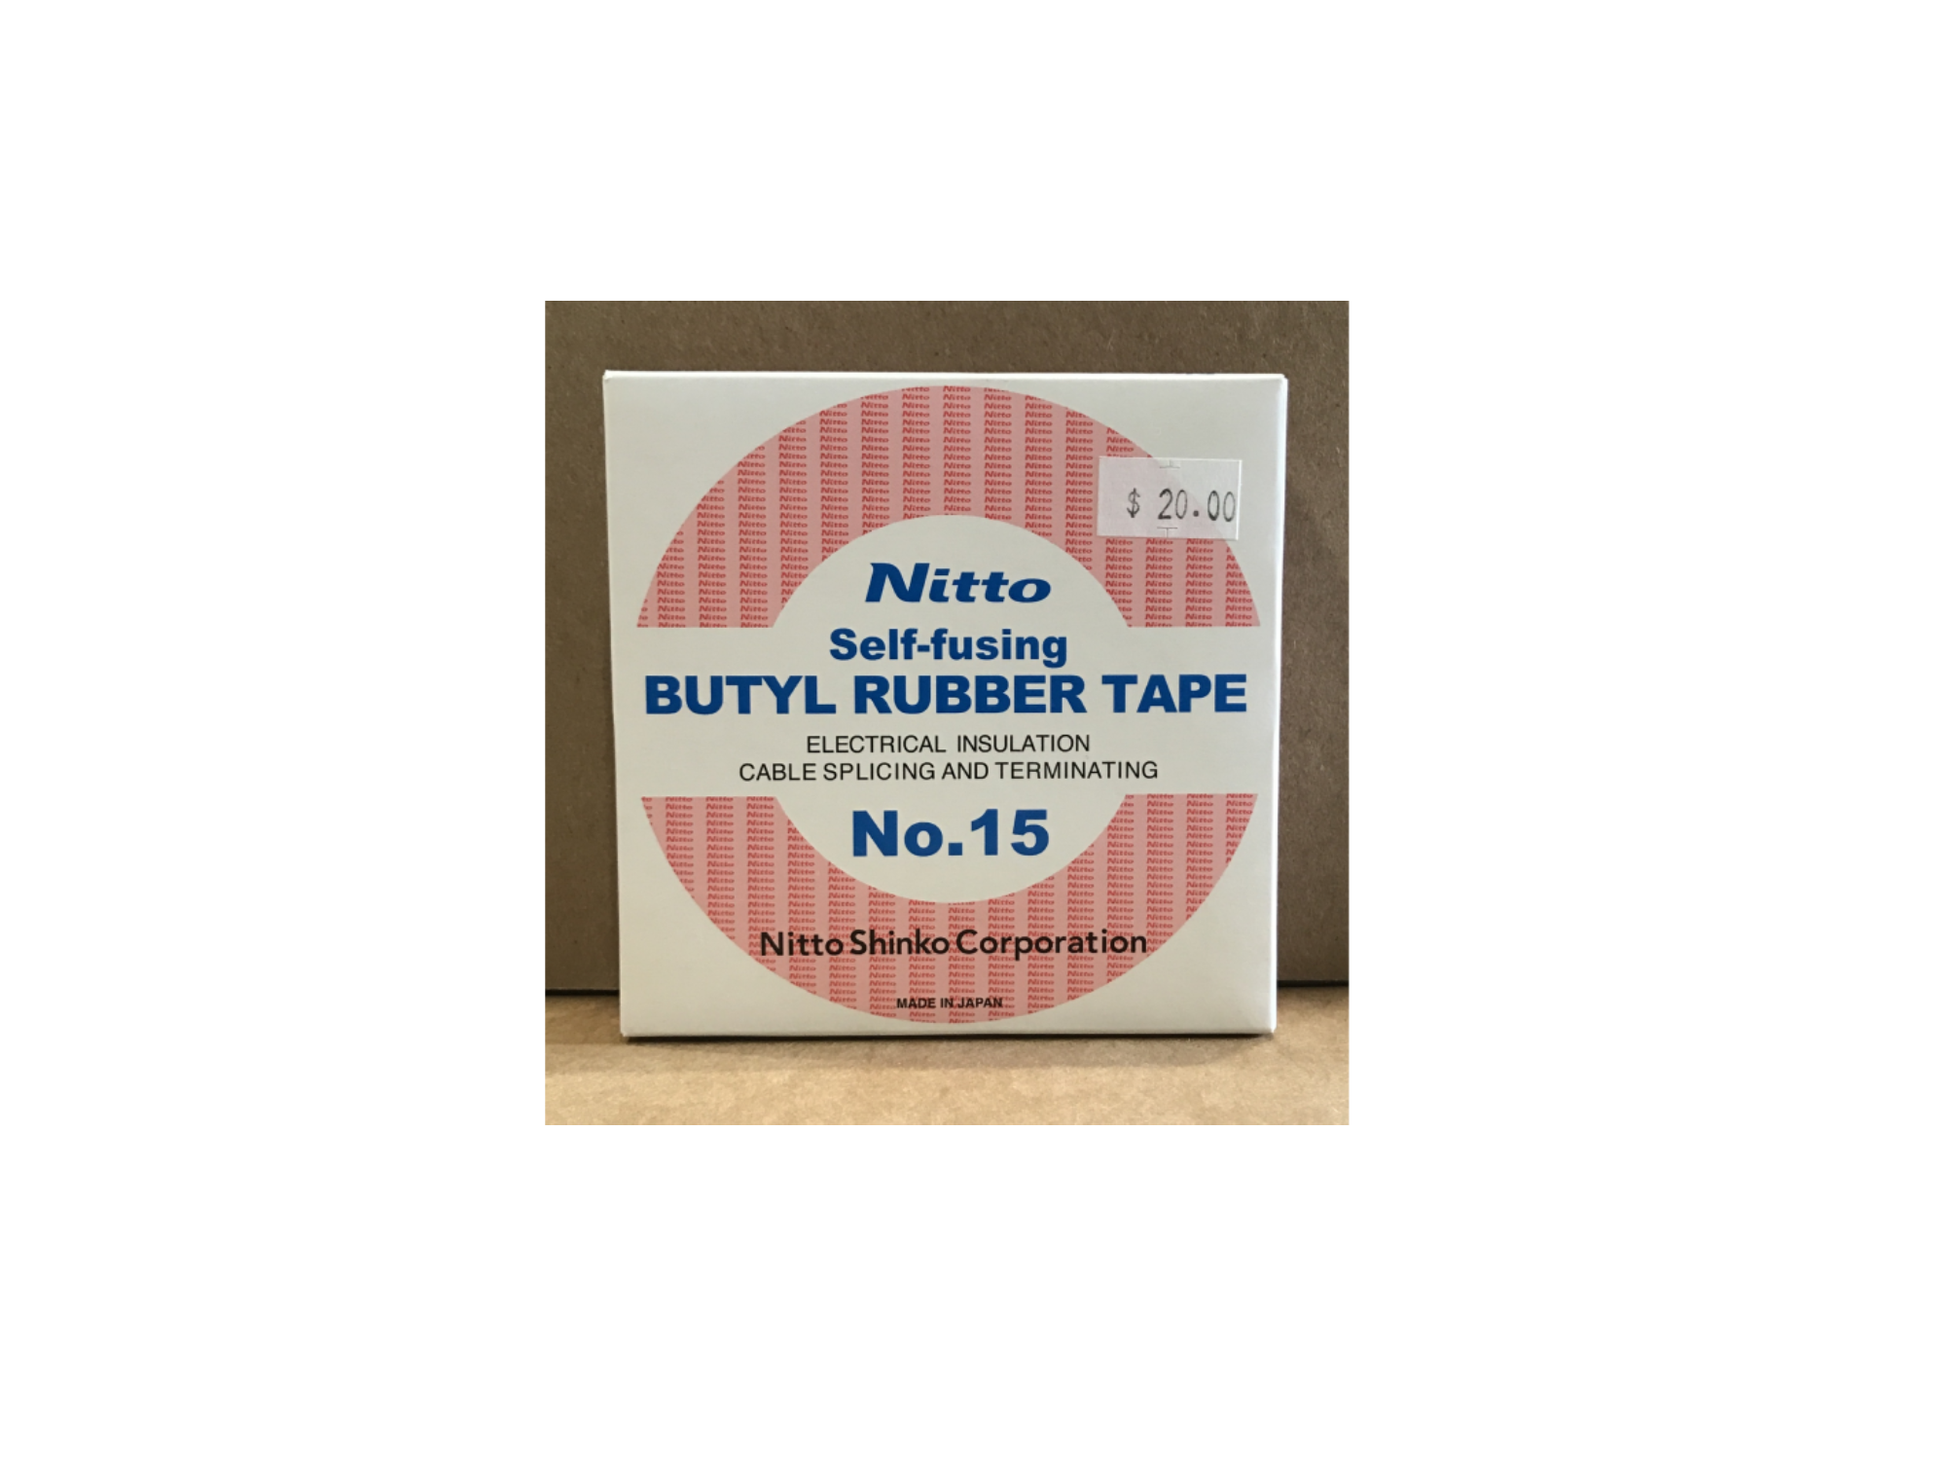 NITTO BUYTL RUBBER TAPE - G&C Communications